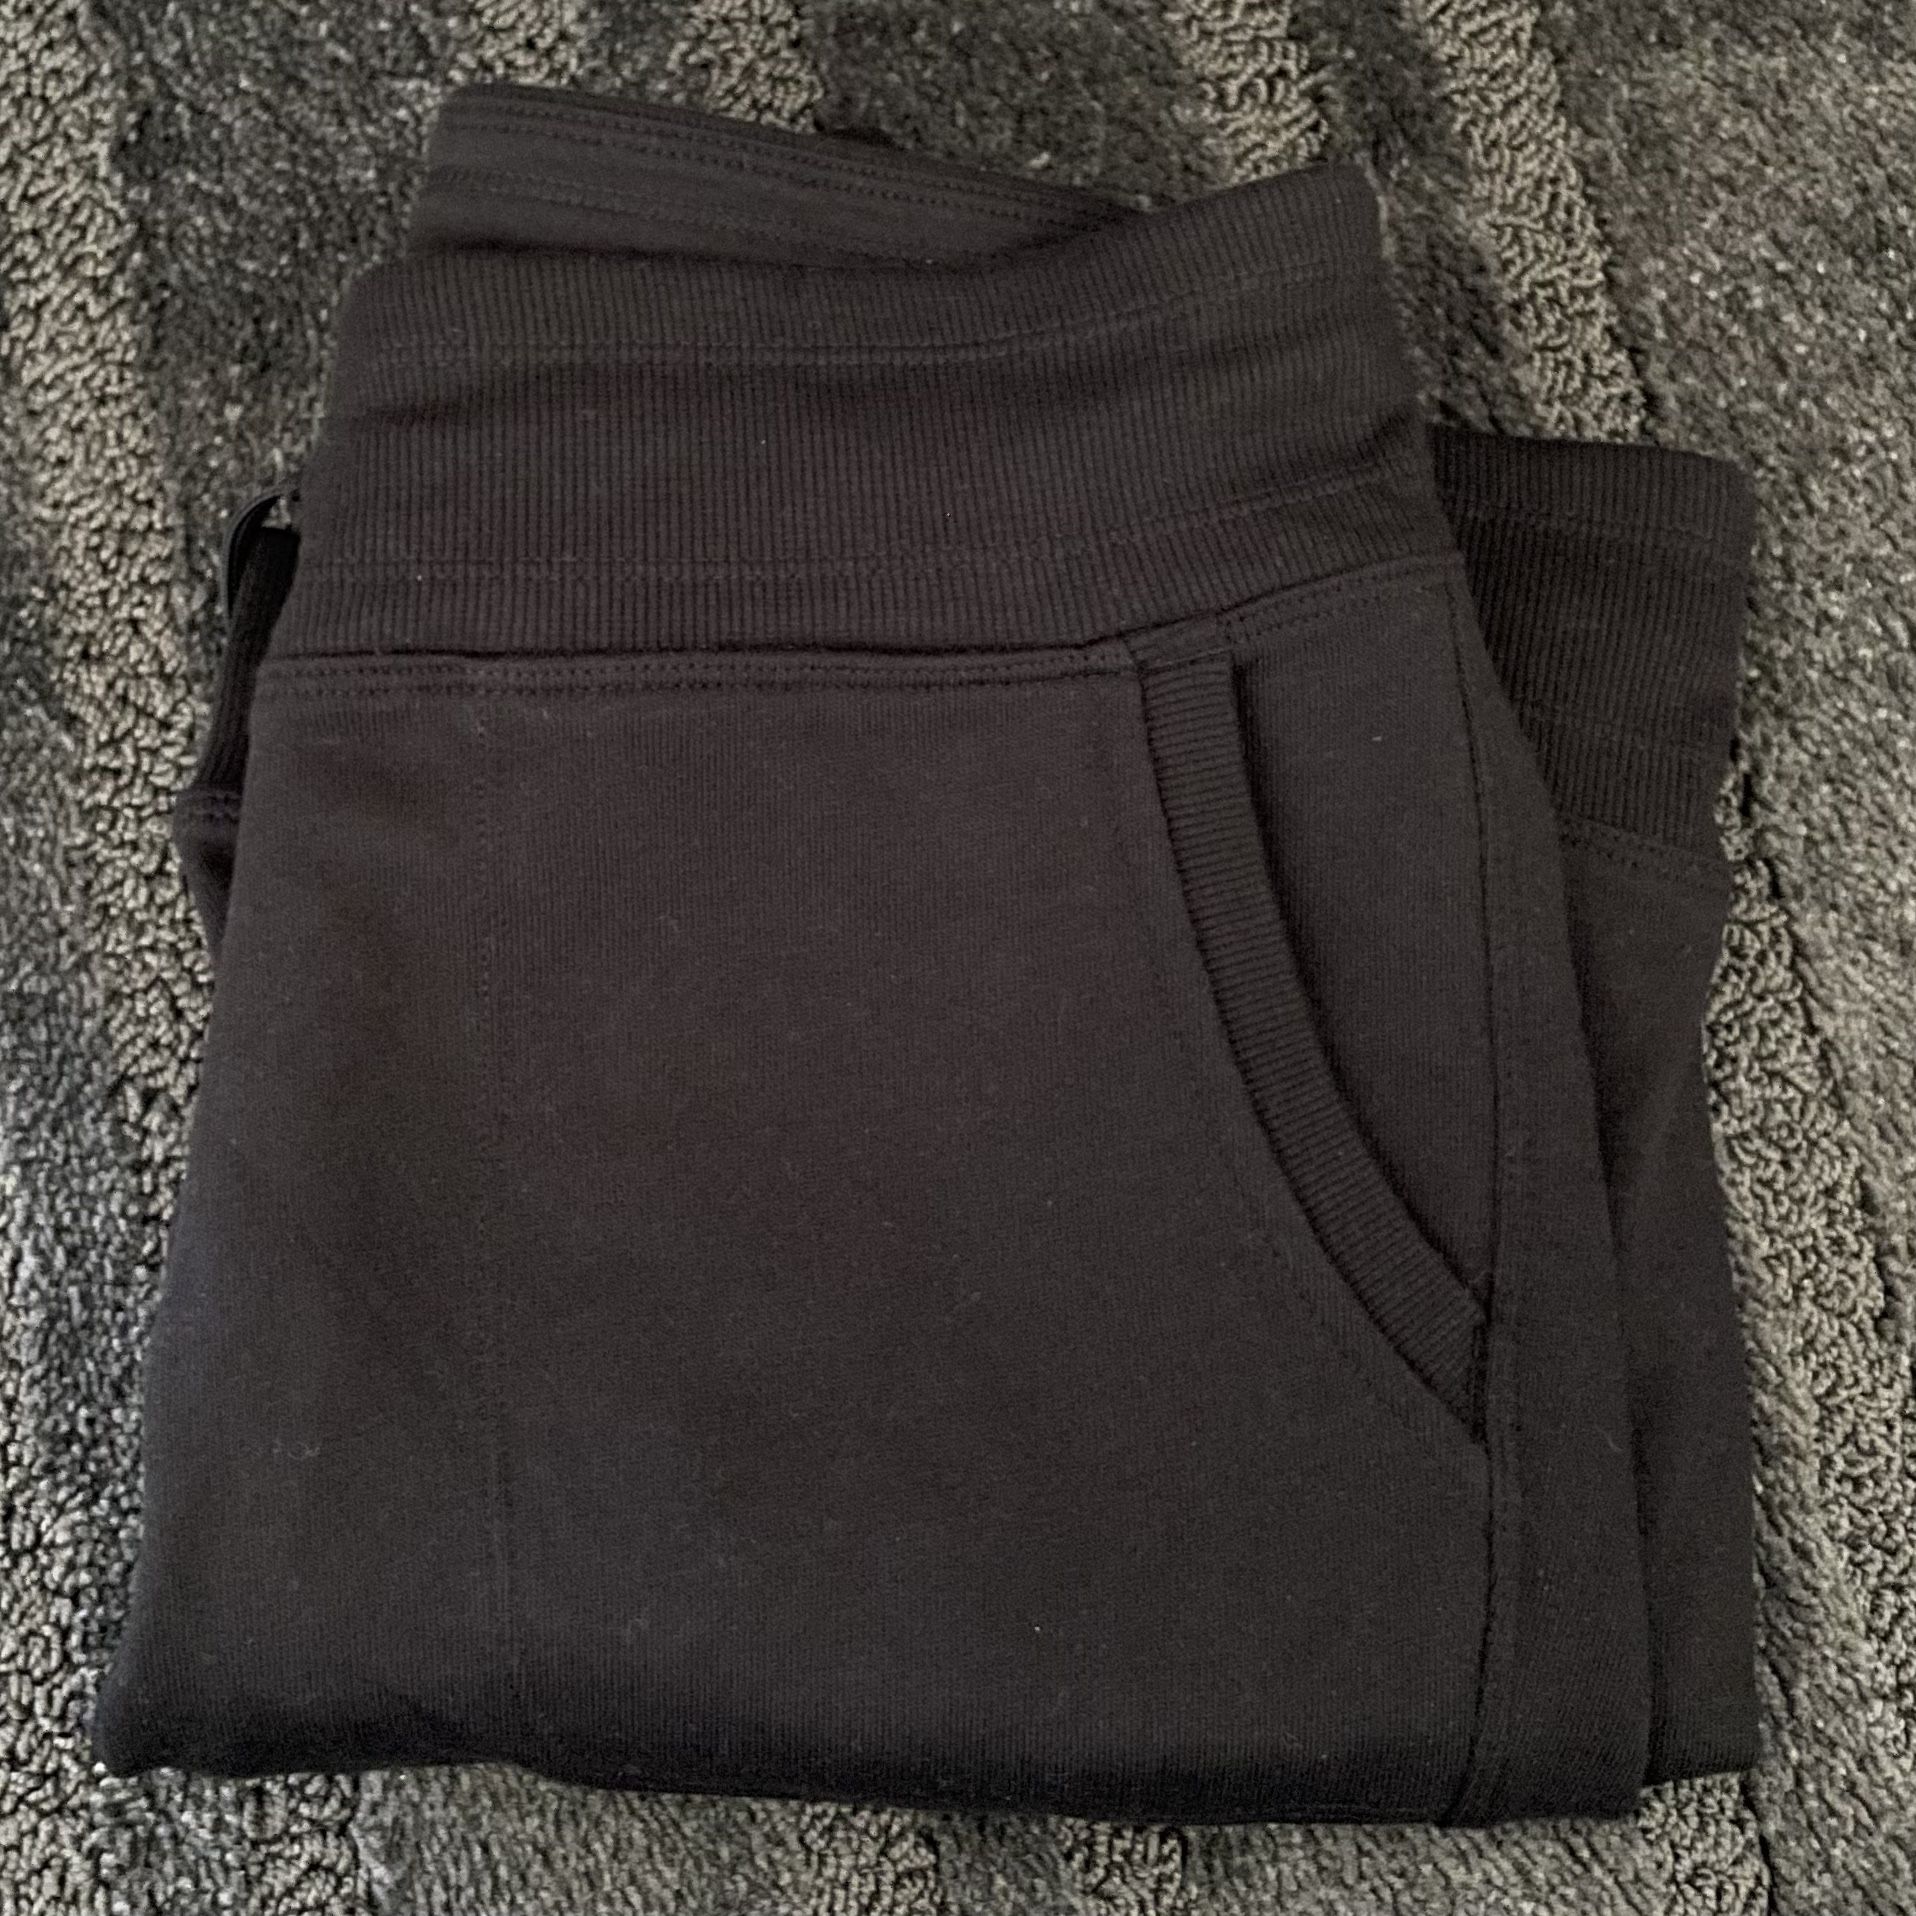 New with tags! Calvin Klein Performance Womens Joggers, Size L